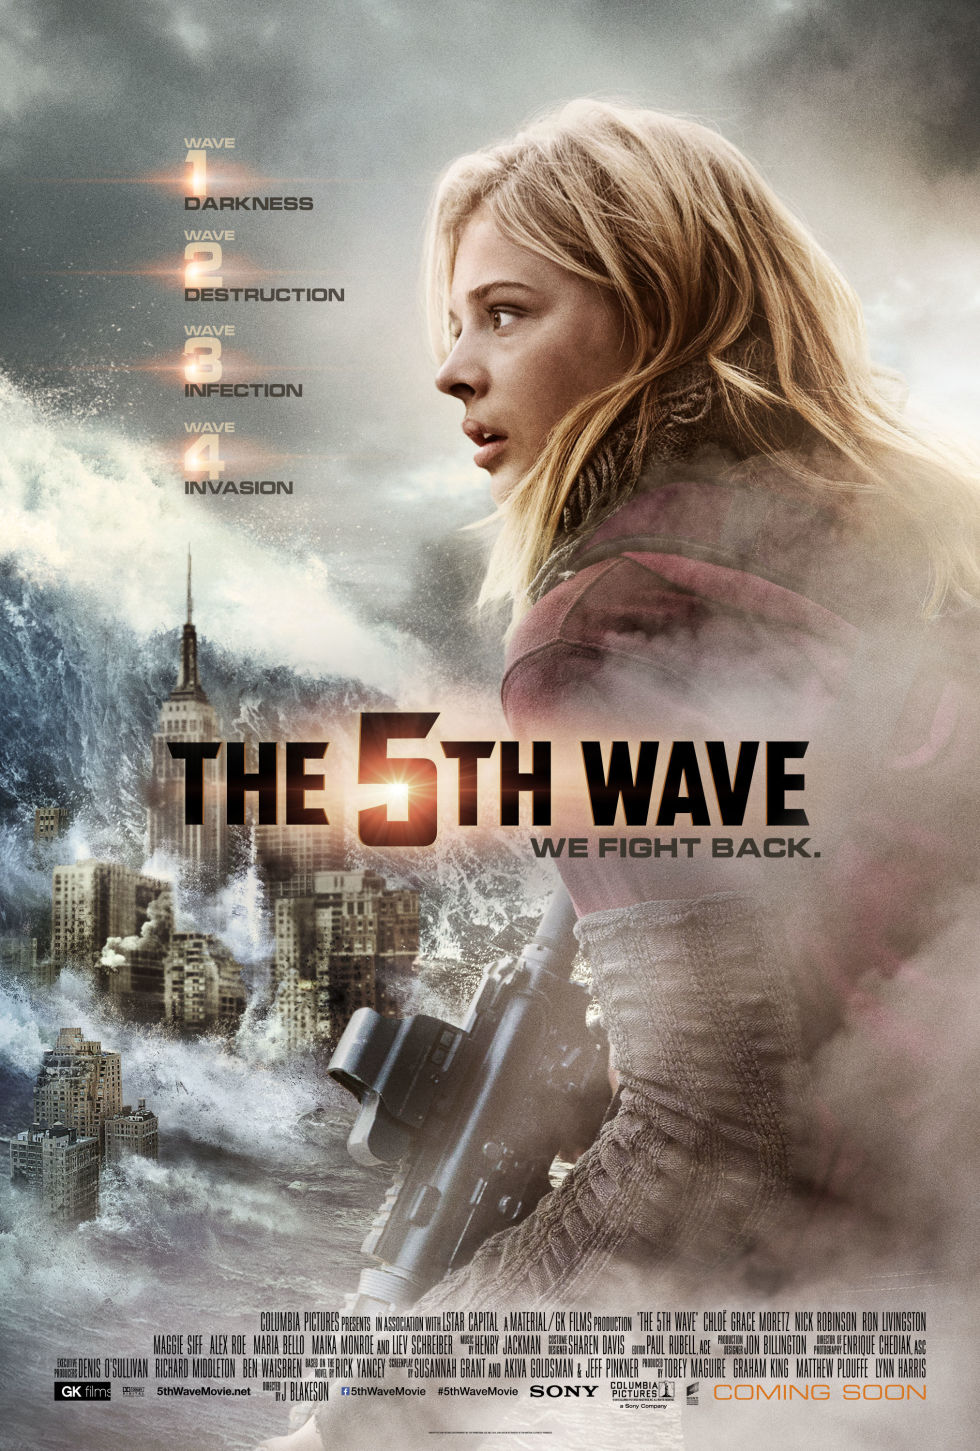 The 5th Wave #14